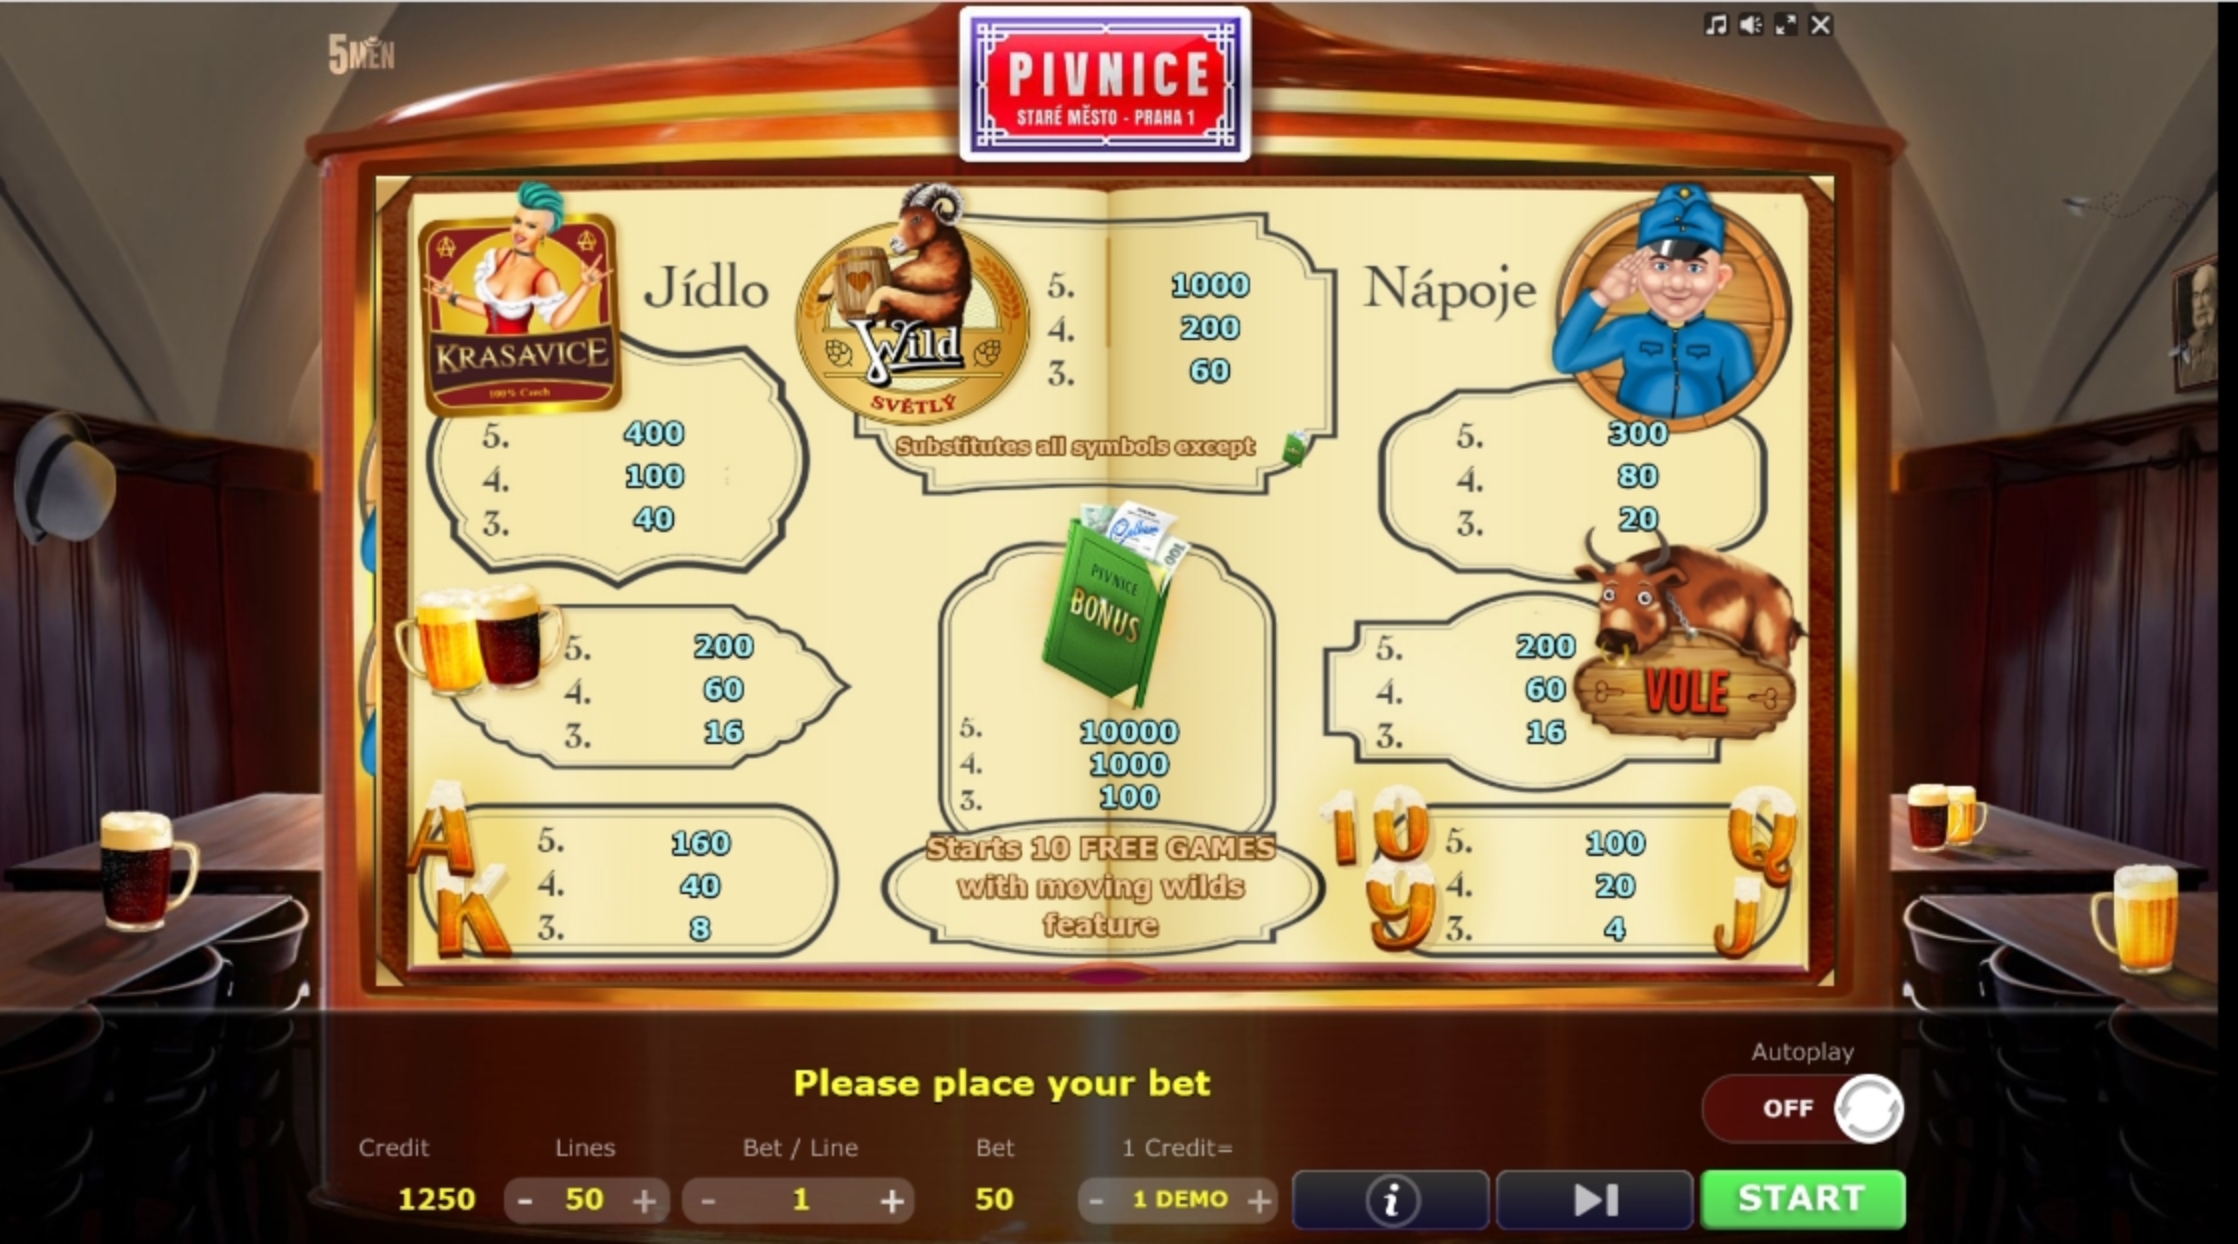 Info of Pivnice Slot Game by Five Men Games